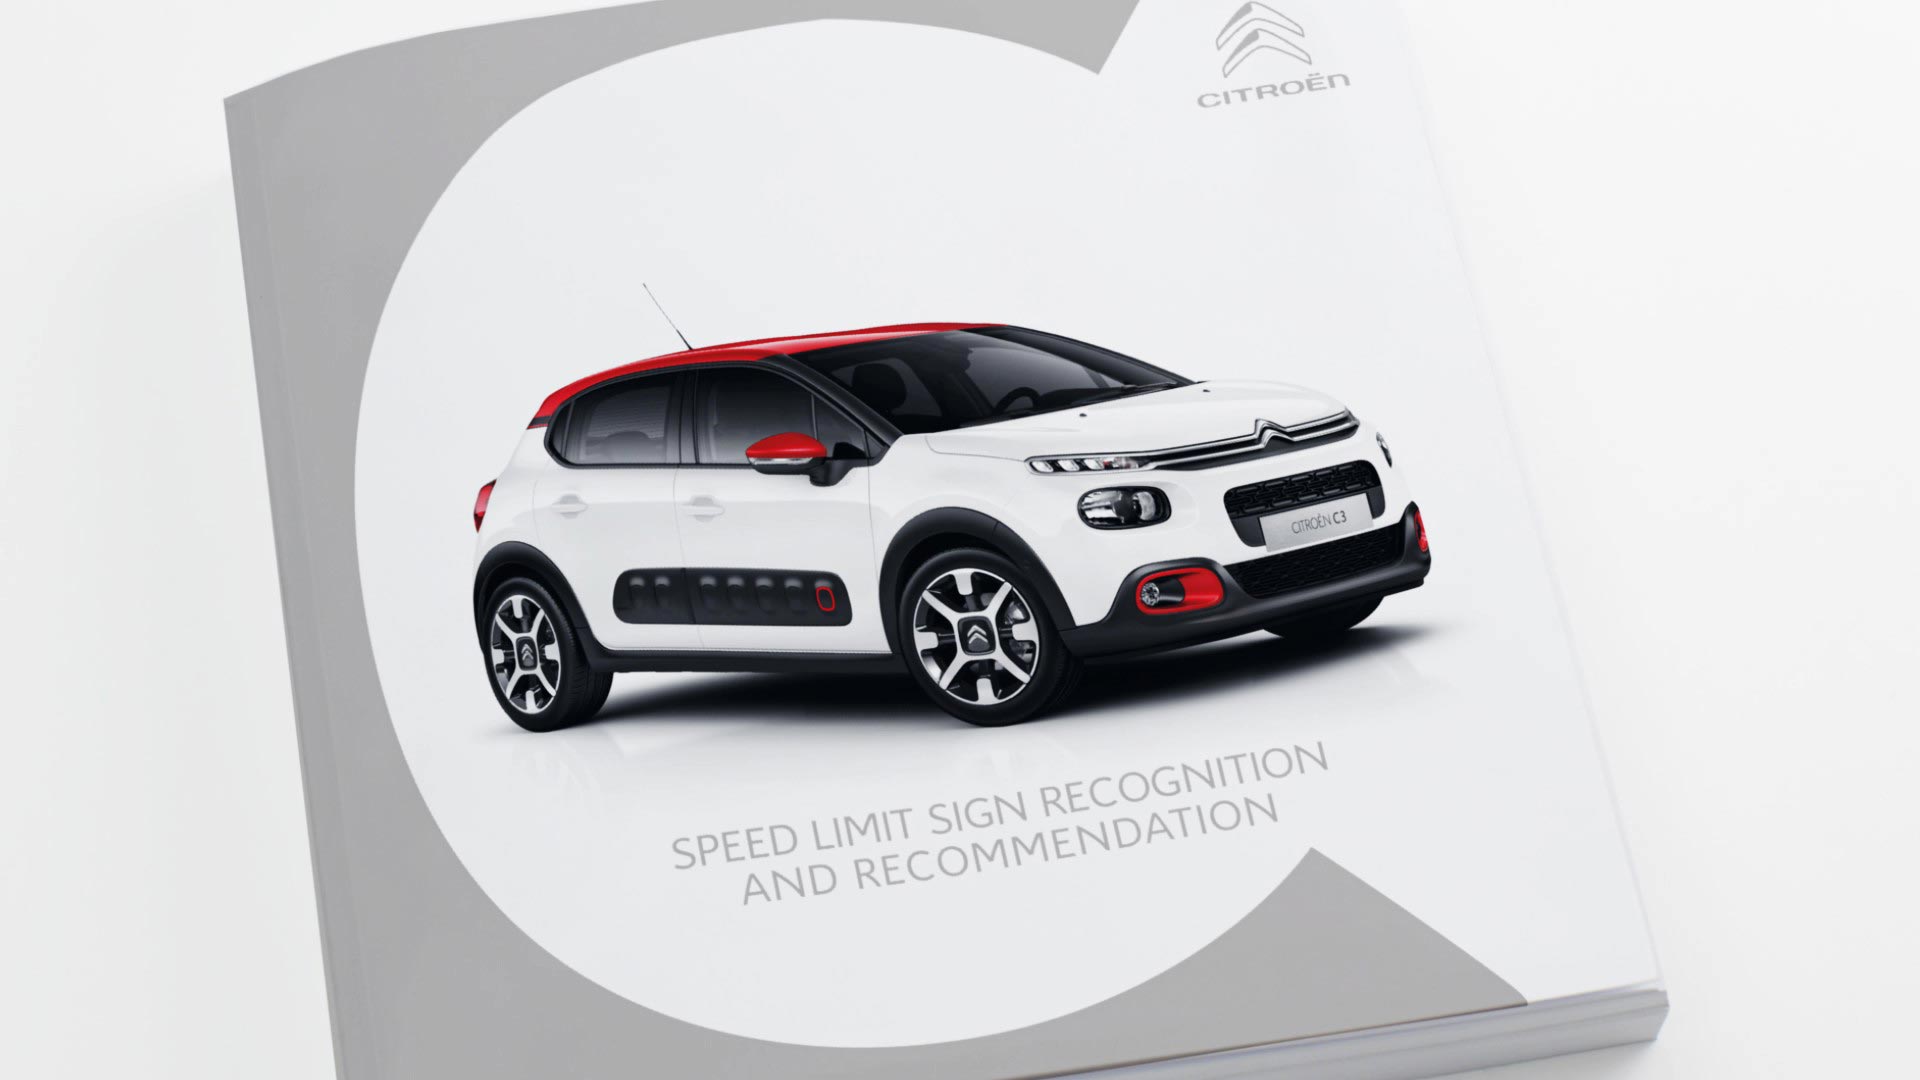 Citroen C3 Tutorial Video - Speed Limit Sign Recognition and Recommendation